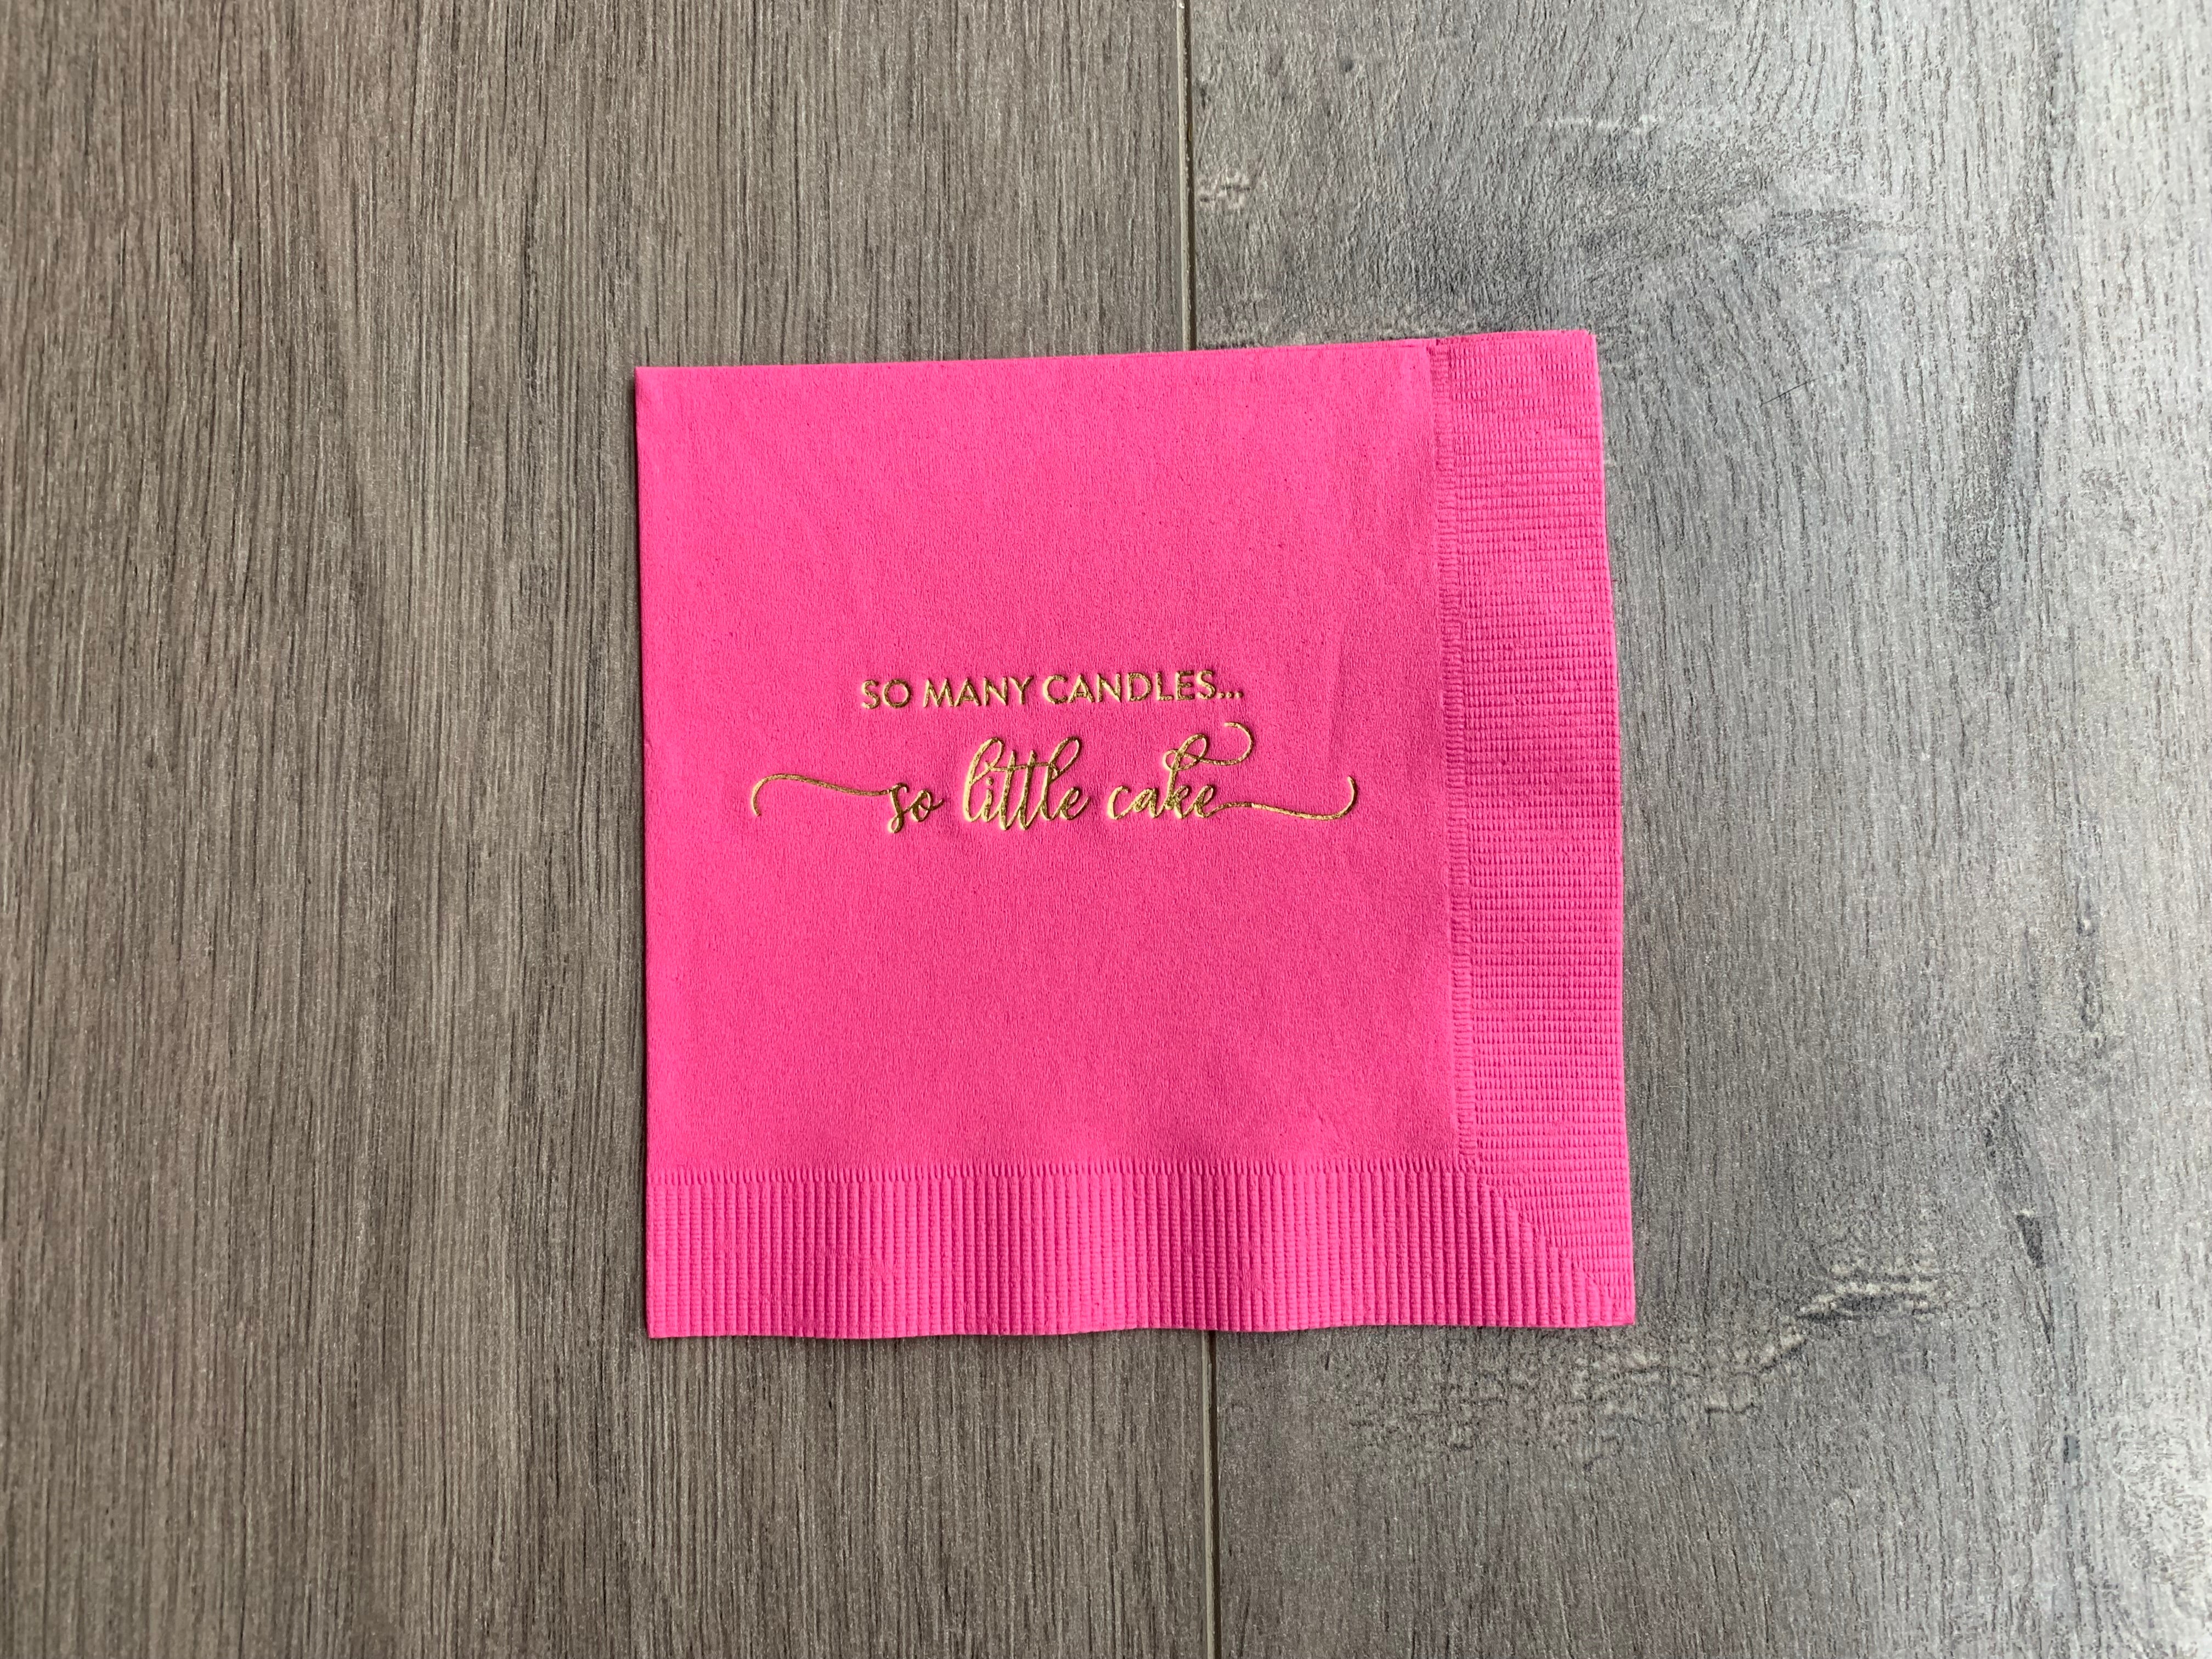 Stationare's bright pink birthday cocktail napkin with gold foil printing that reads "so many candles, so little cake"